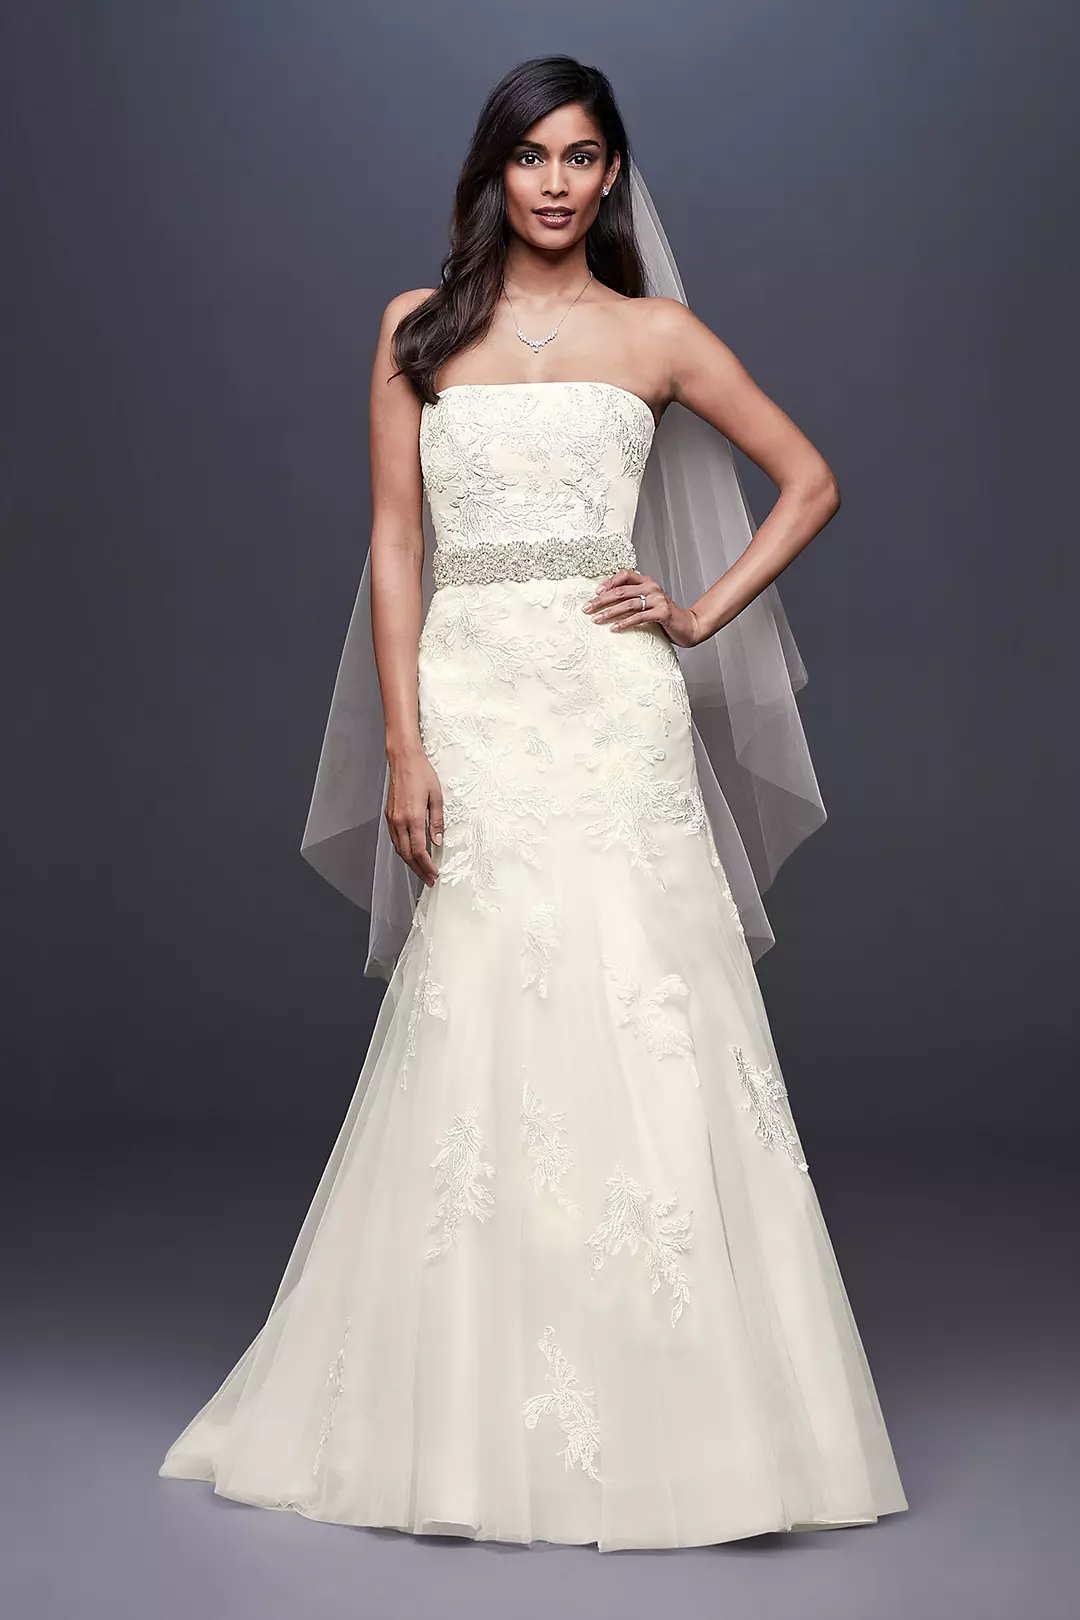 Strapless Lace Mermaid Wedding Dress With Tulle Skirt